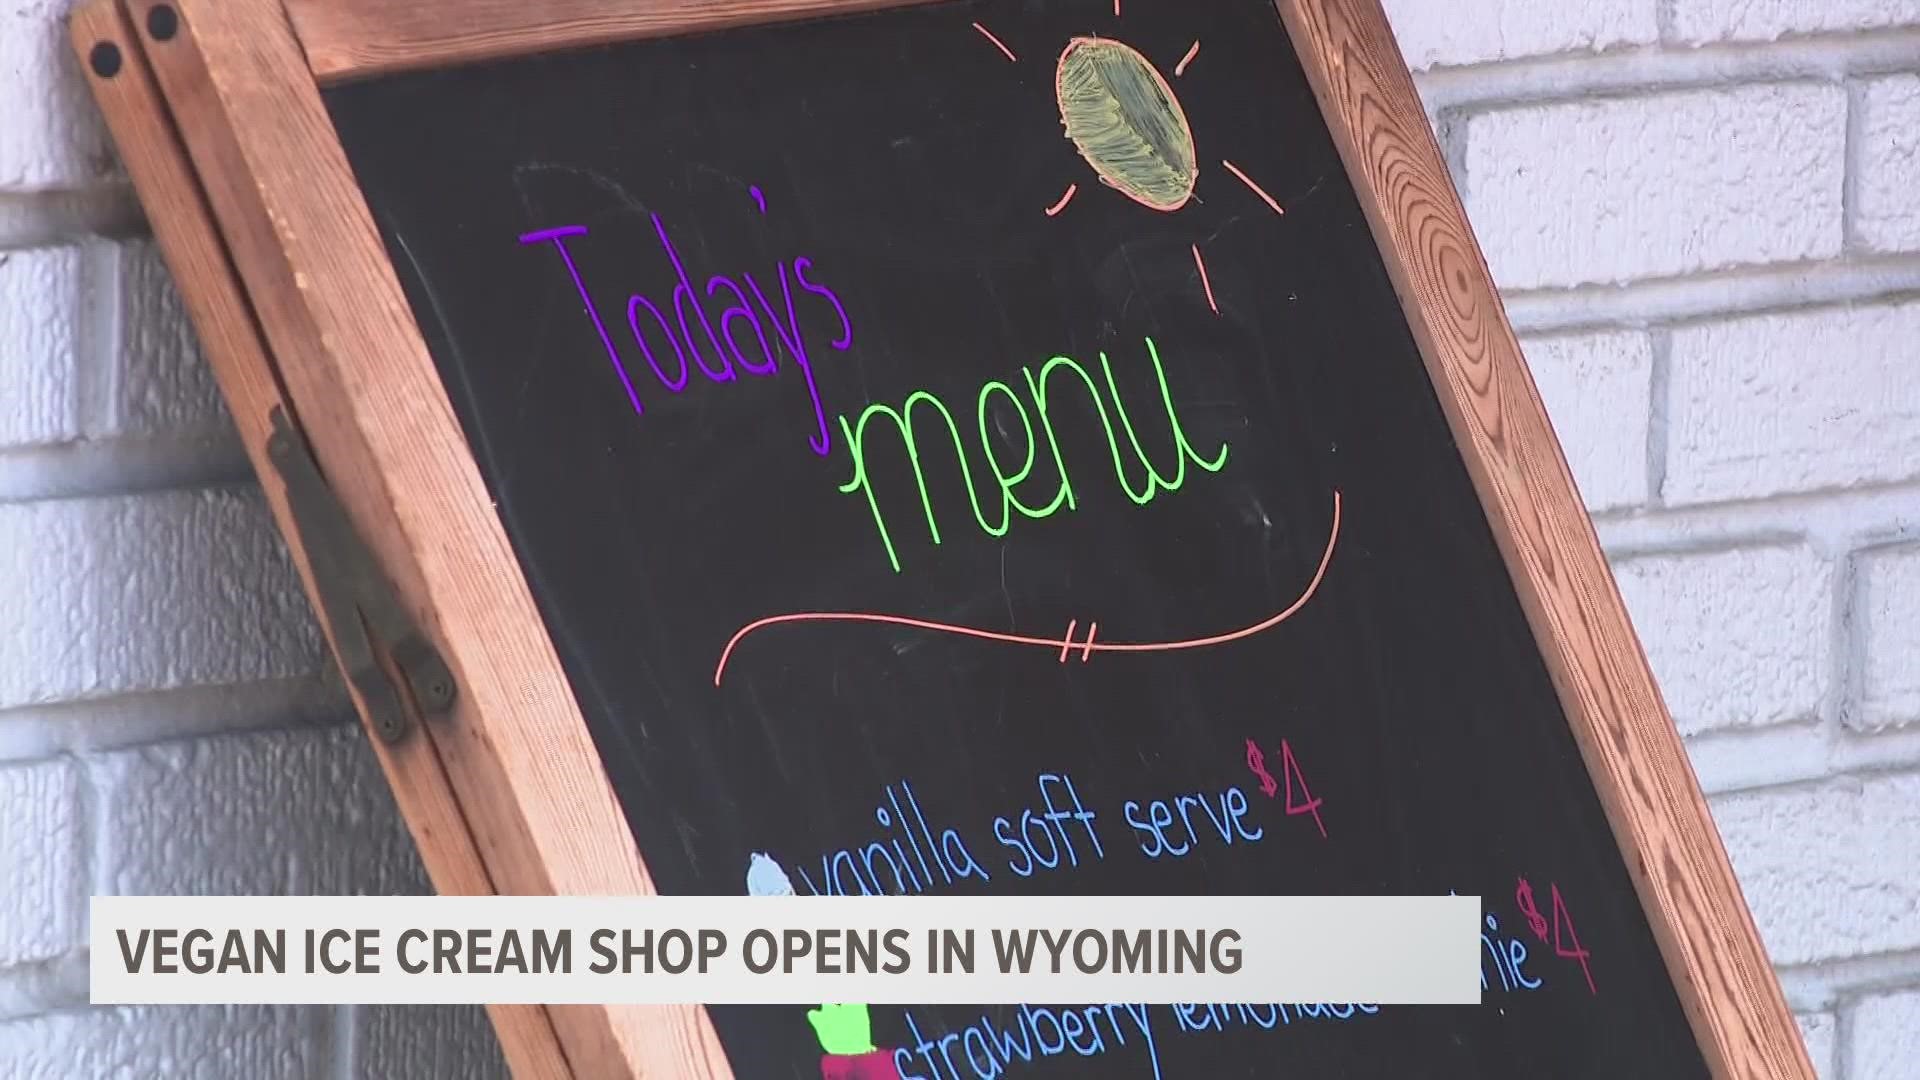 Tasteful Vegan Frozen Desserts is the first female minority owned vegan ice cream shop in the state.